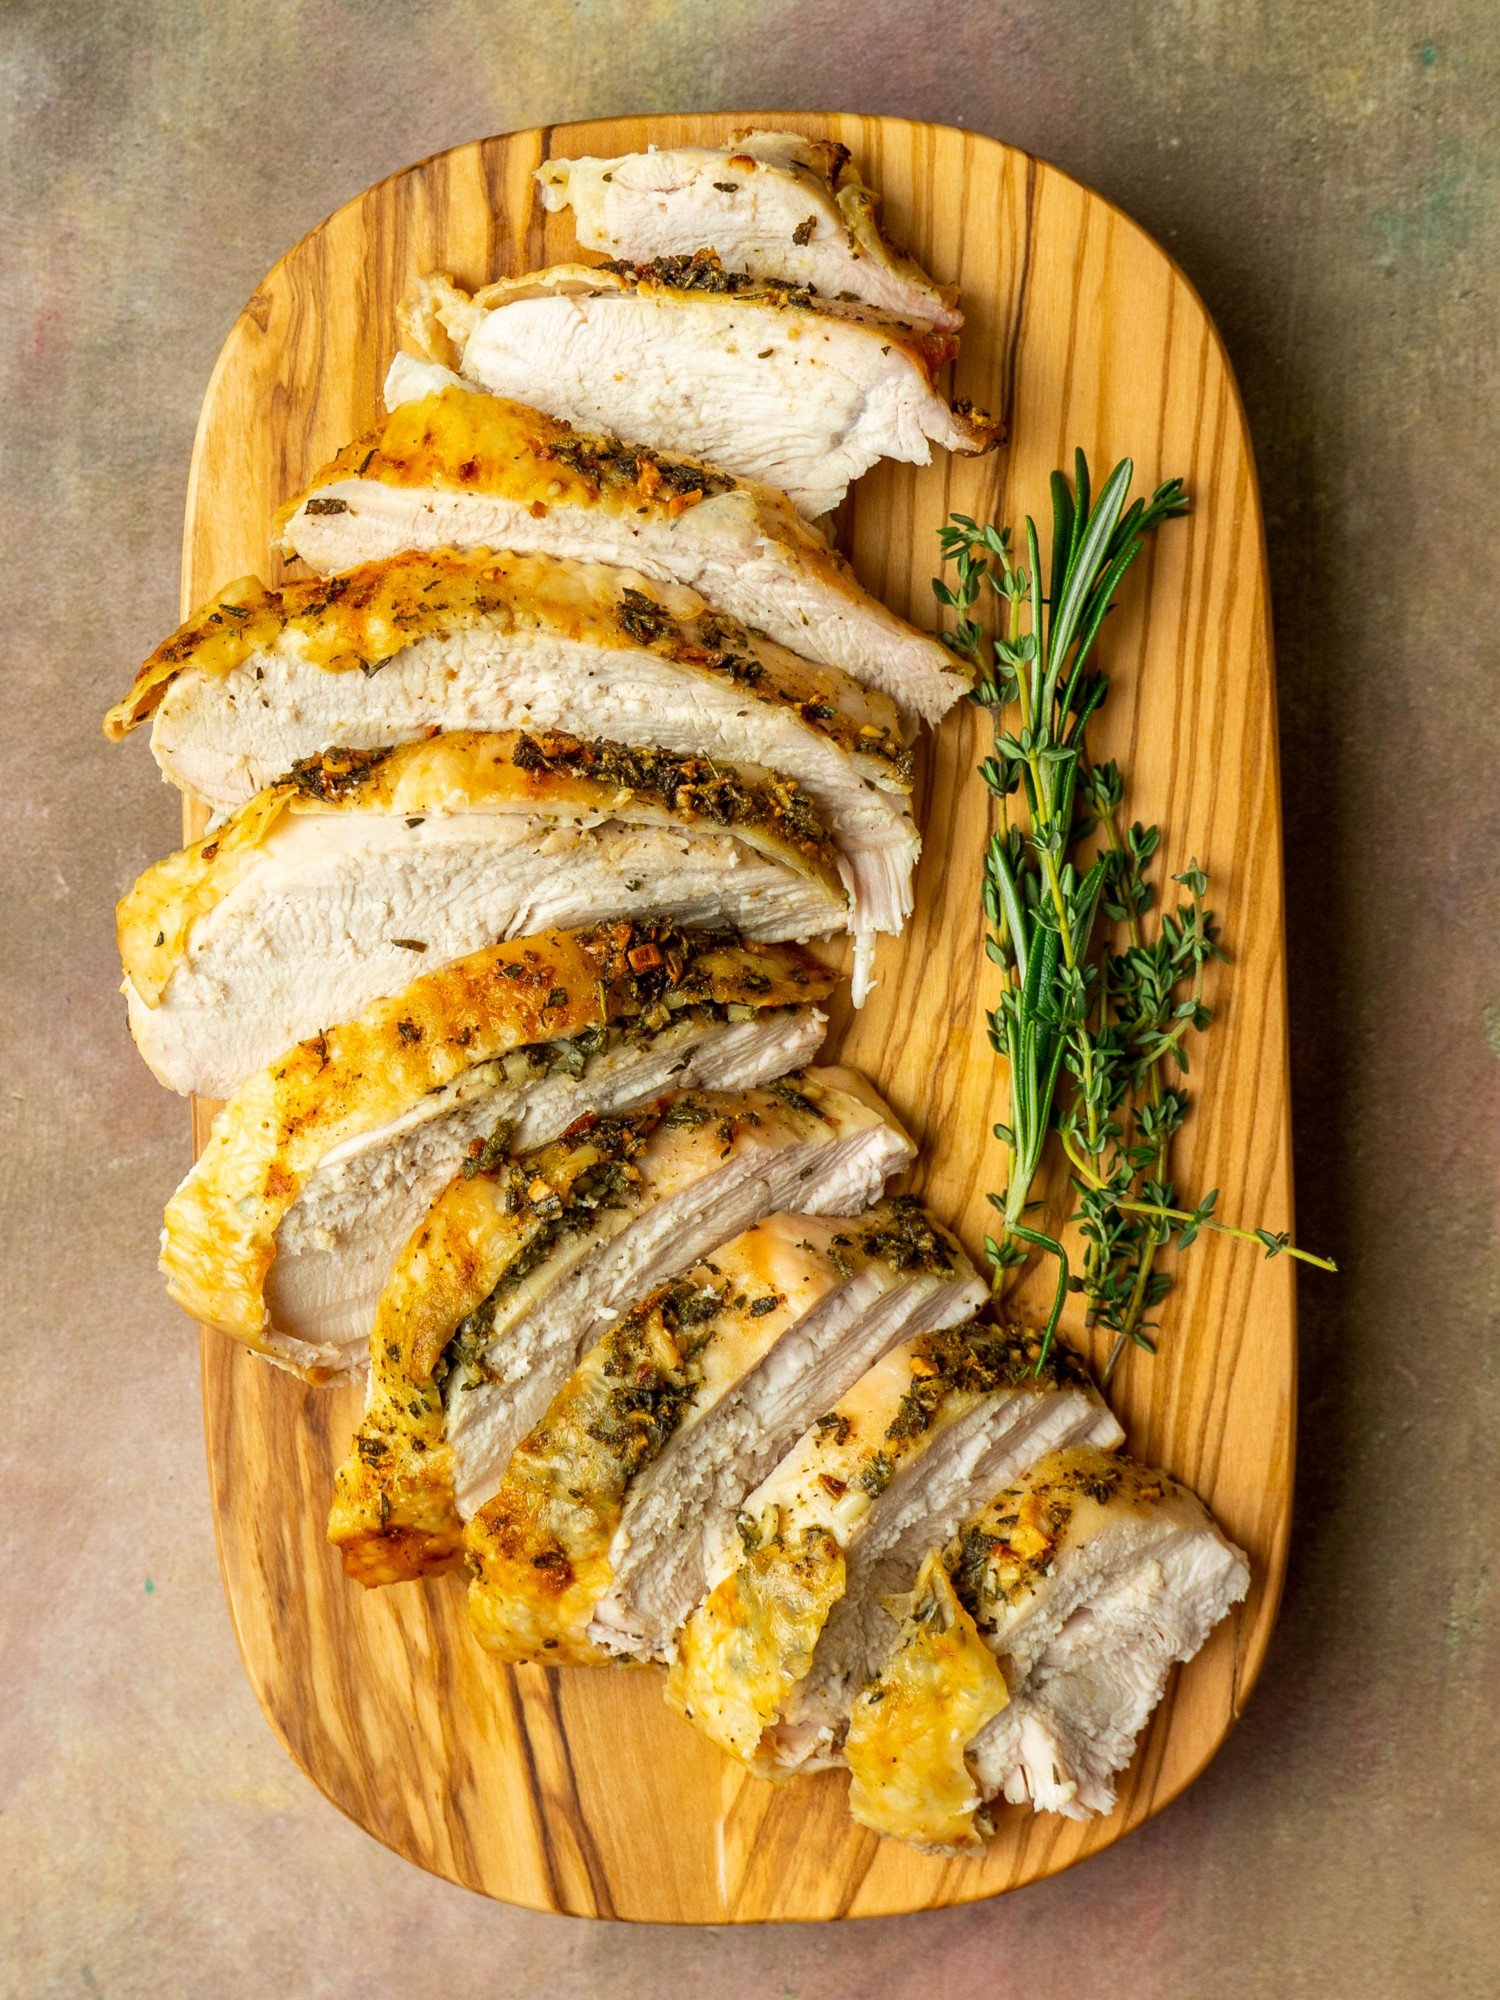 Oven Roasted Turkey Breast at Whole Foods Market